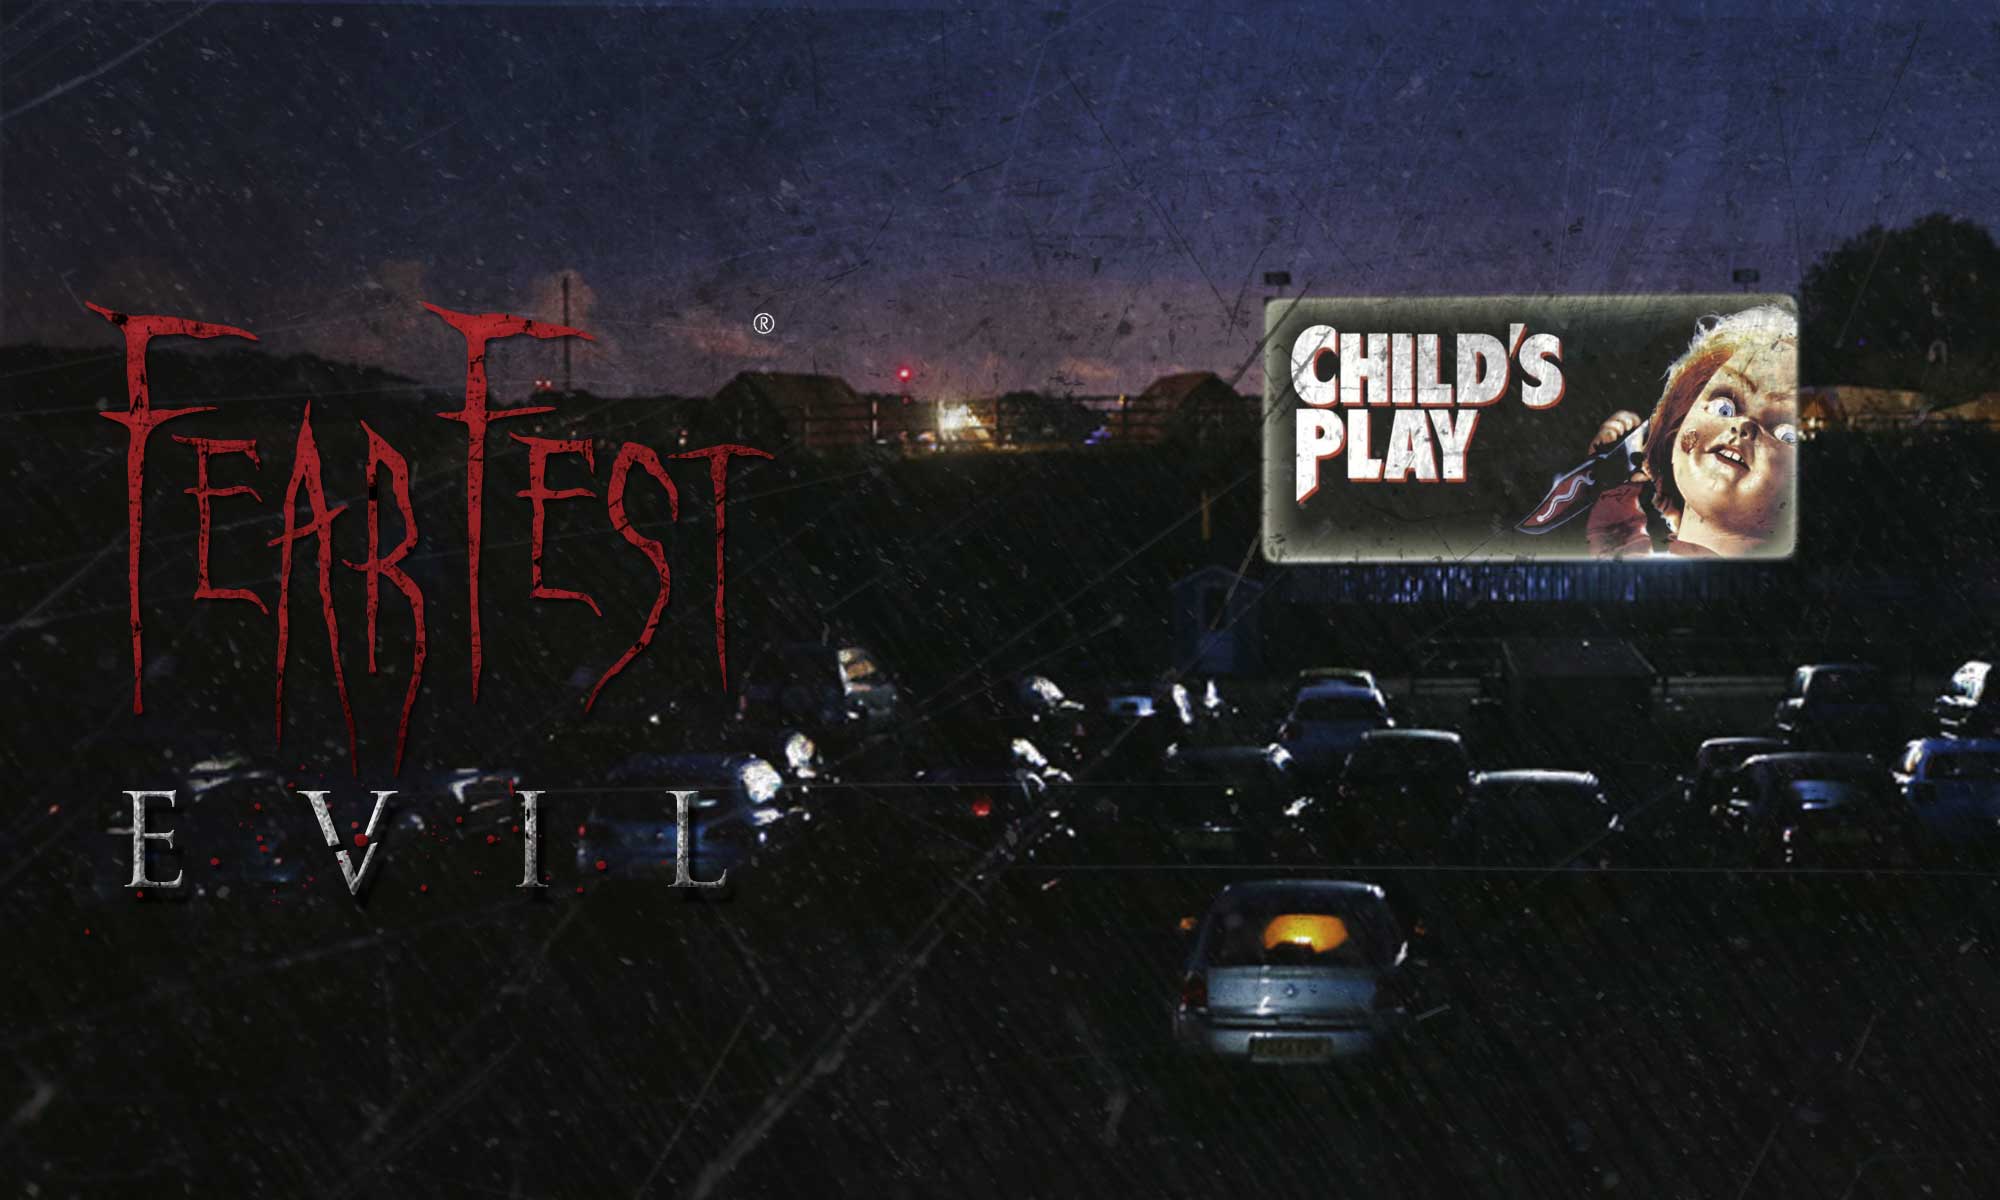 Child's Play (1988) Free Drive-In Cinema Screening at FearFest-Evil September 2019